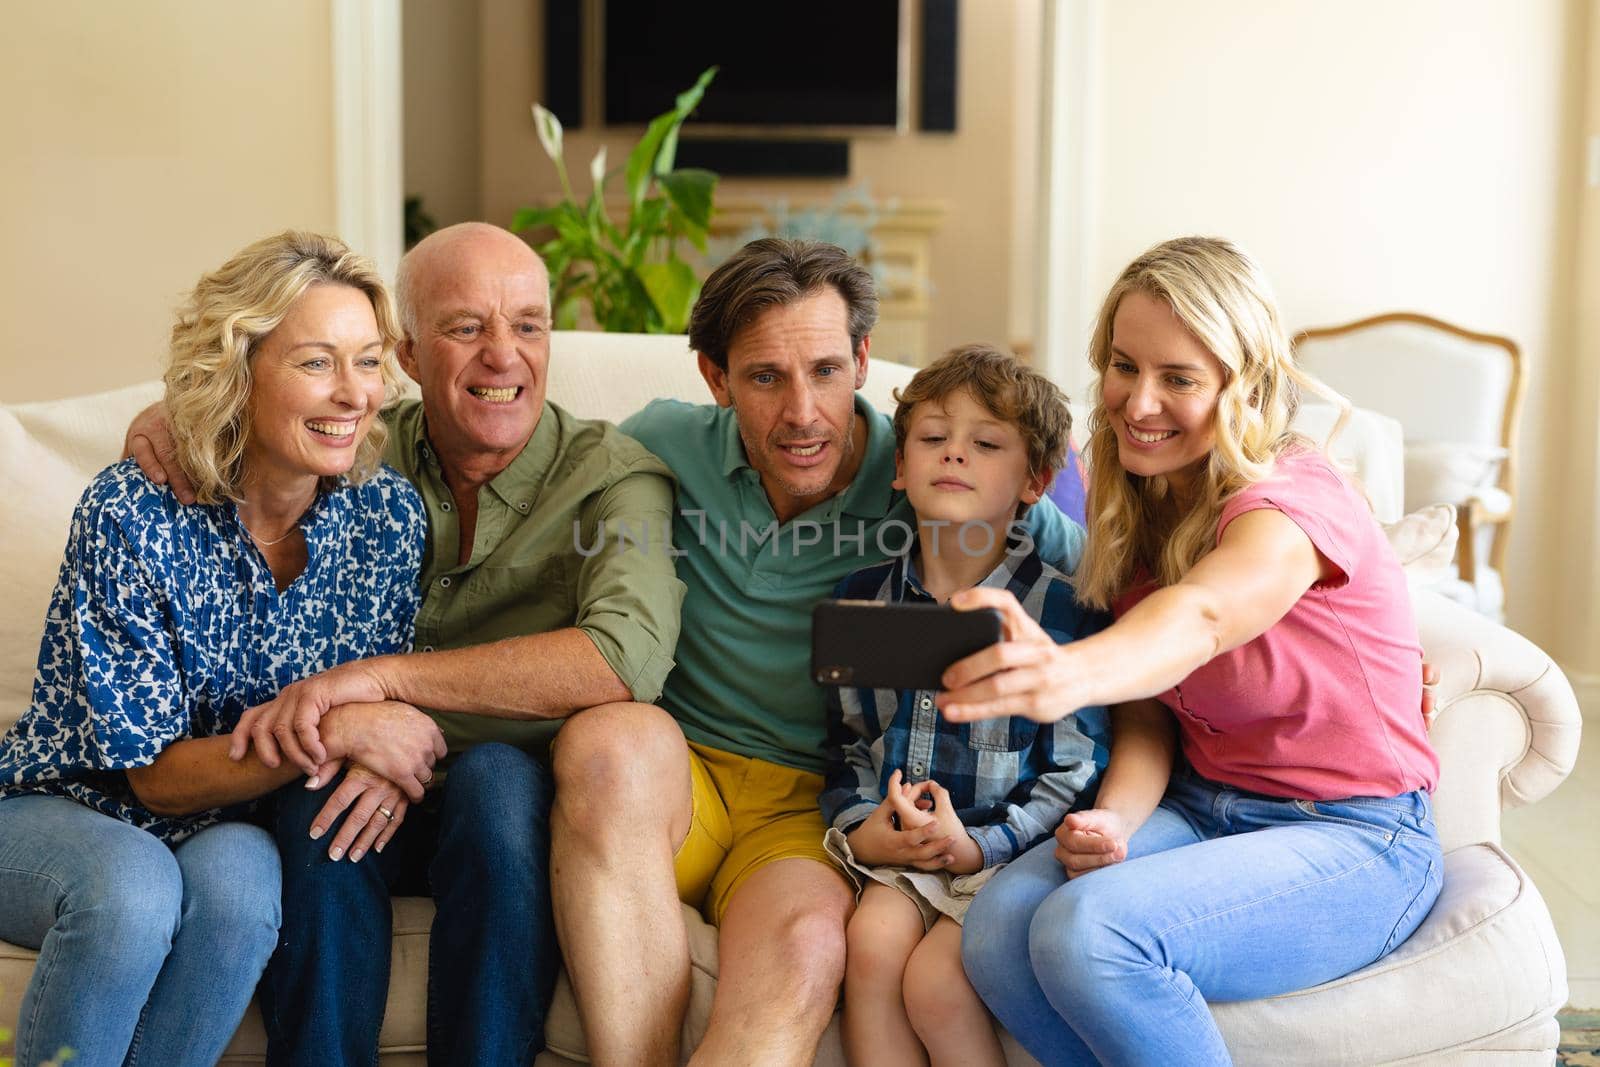 Caucasian three generation family taking a selfie while sitting together on the couch at home by Wavebreakmedia